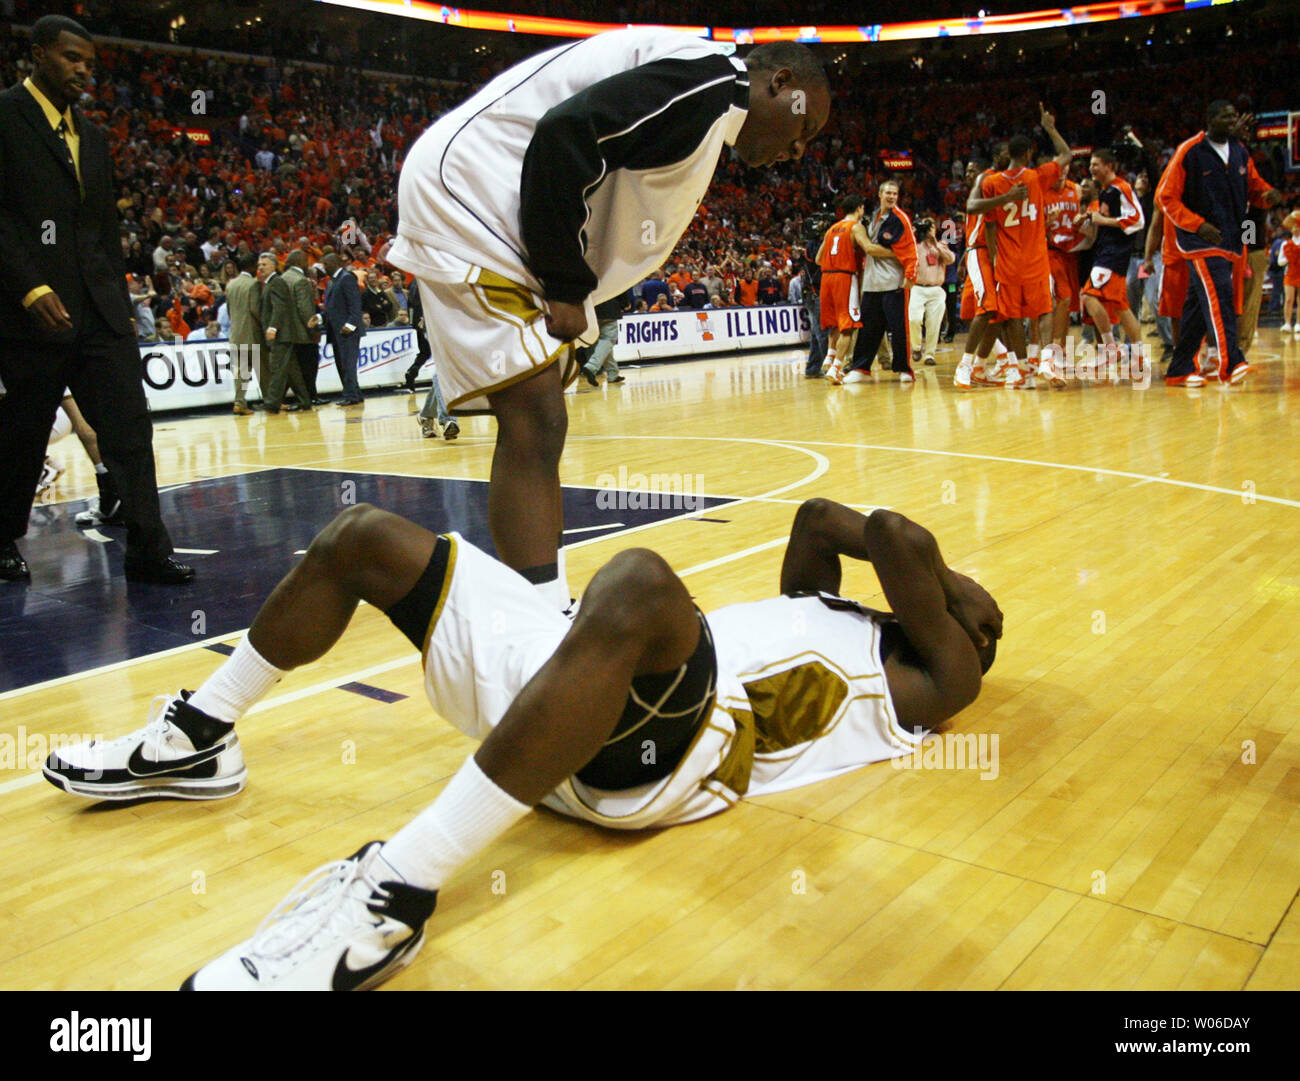 University of Missouri's Michael Anderson Jr. (L) checks on teammate Keon  Lawrence as the University of Illinois celebrate their win 59-58 in the  Annual Busch Braggin' Rights game at the Scottrade Center